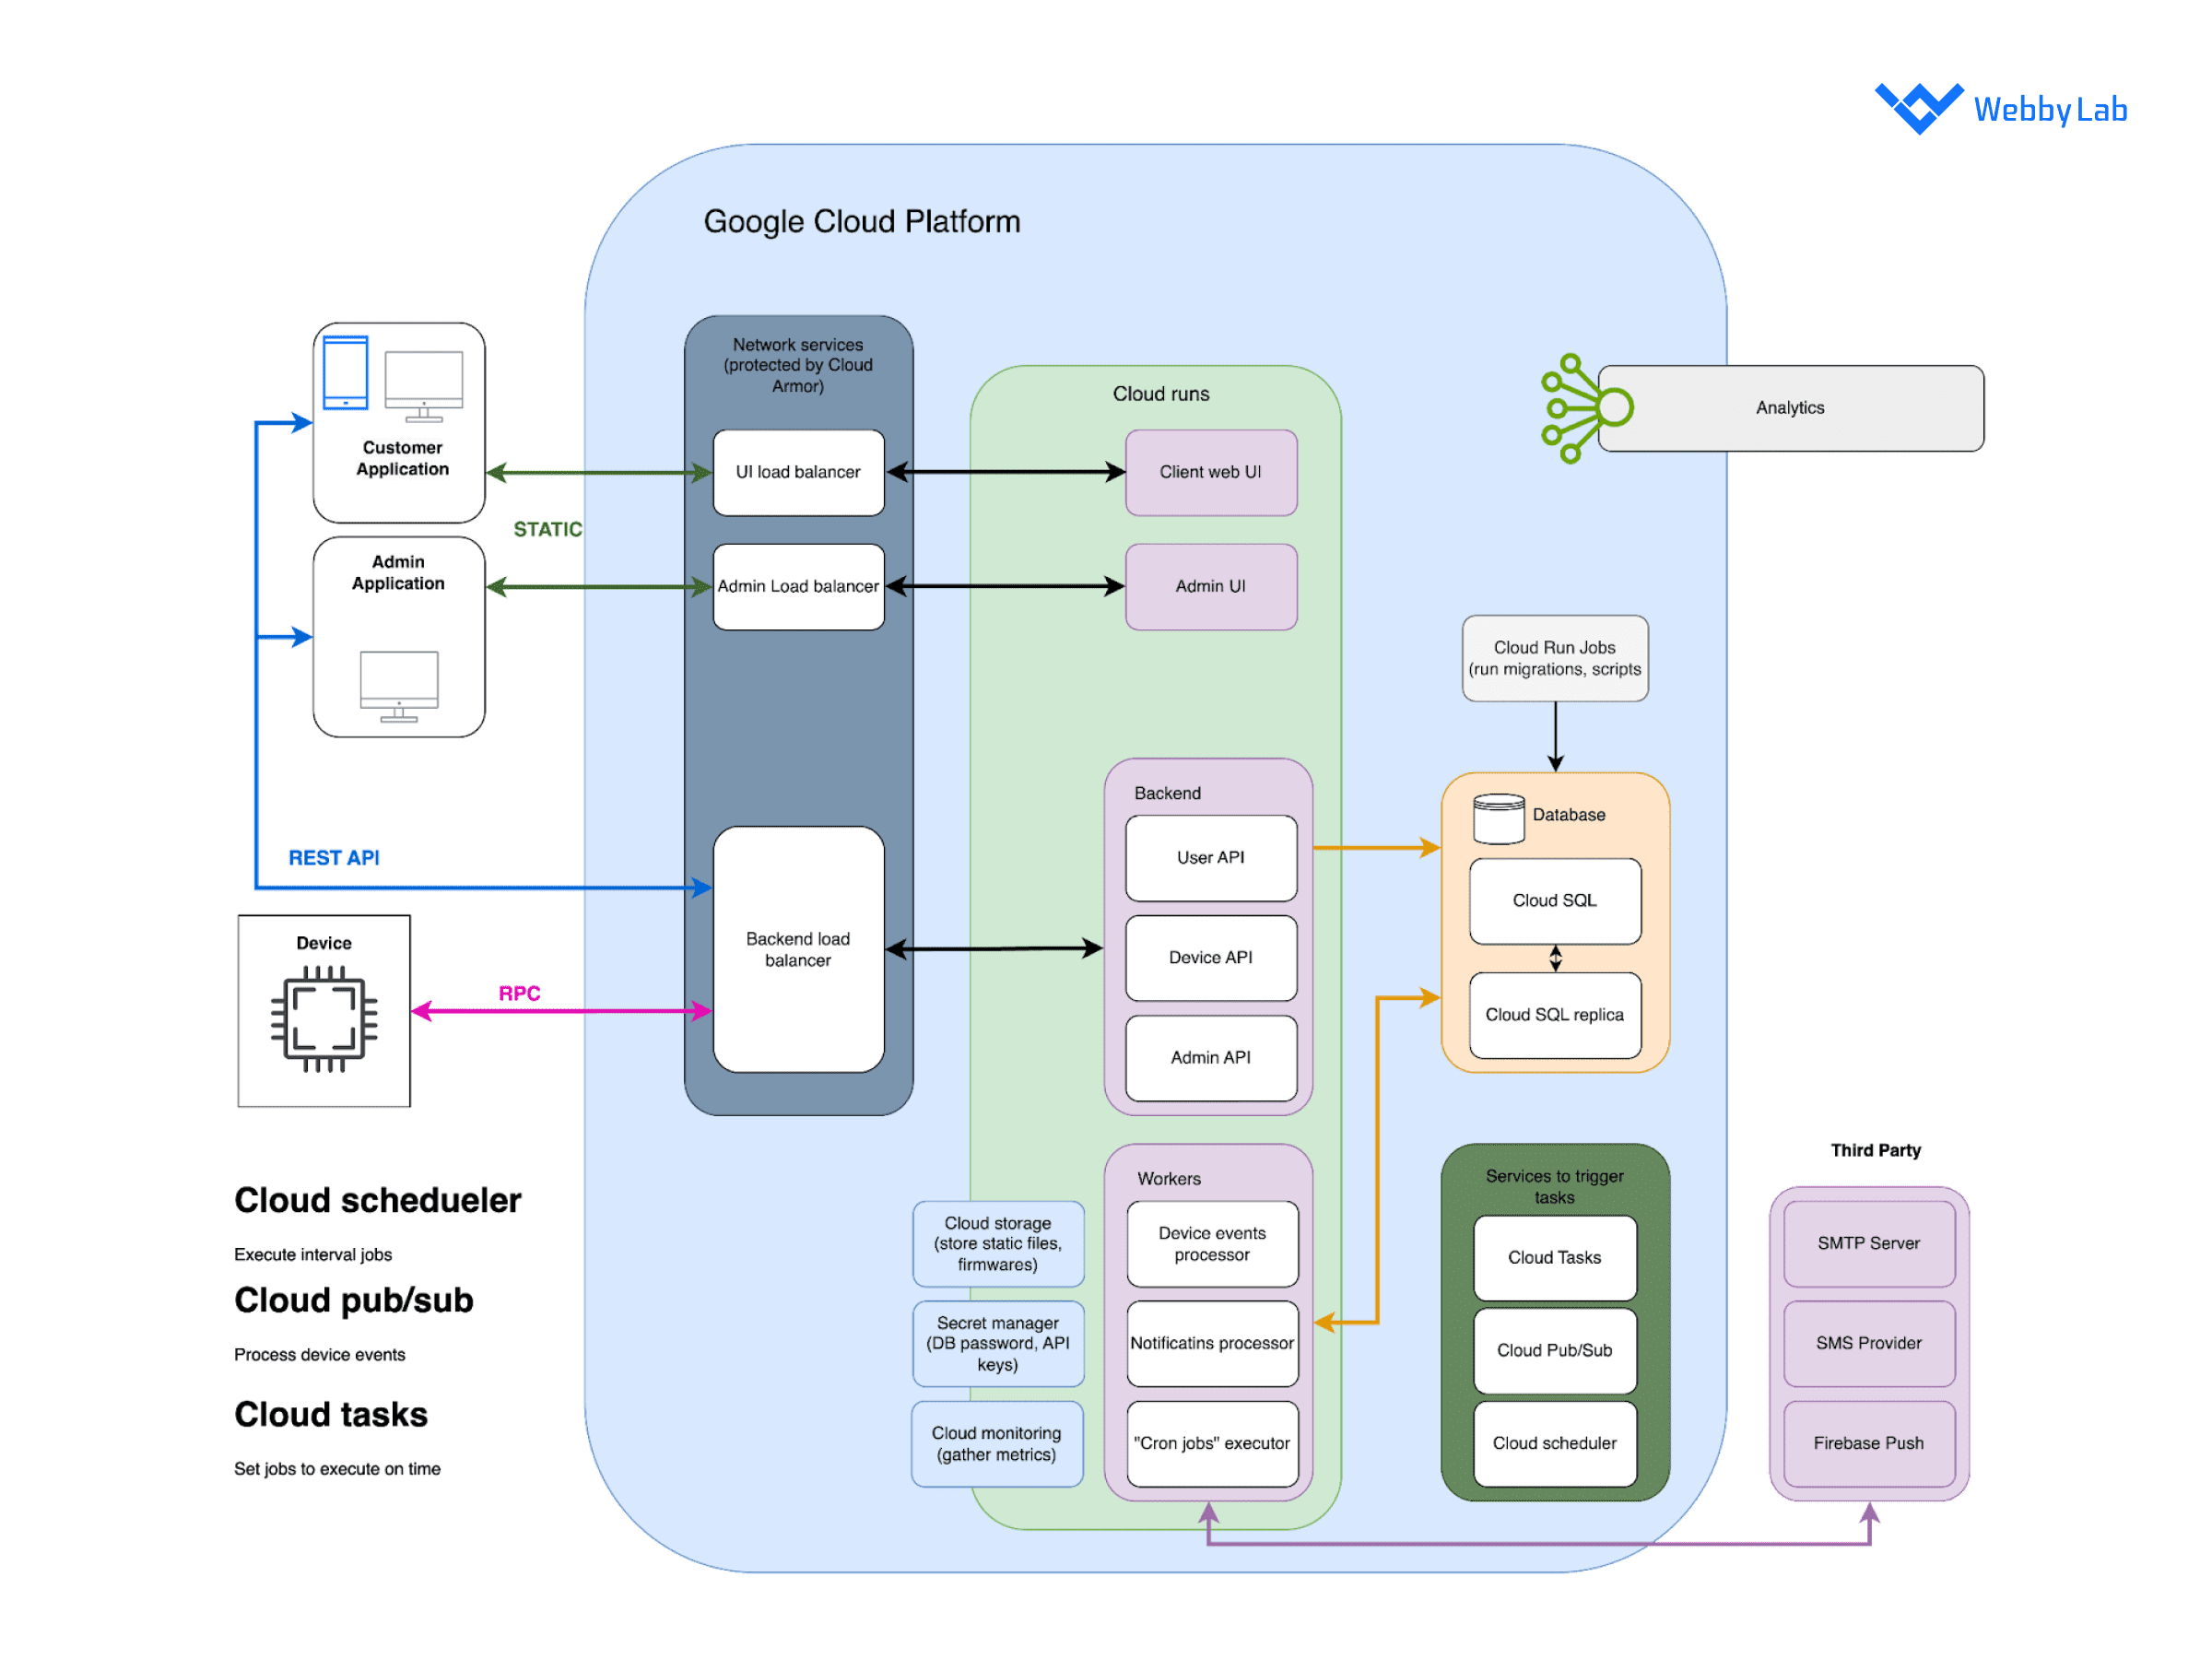 The IoT architecture based on GCP IoT cloud platforms